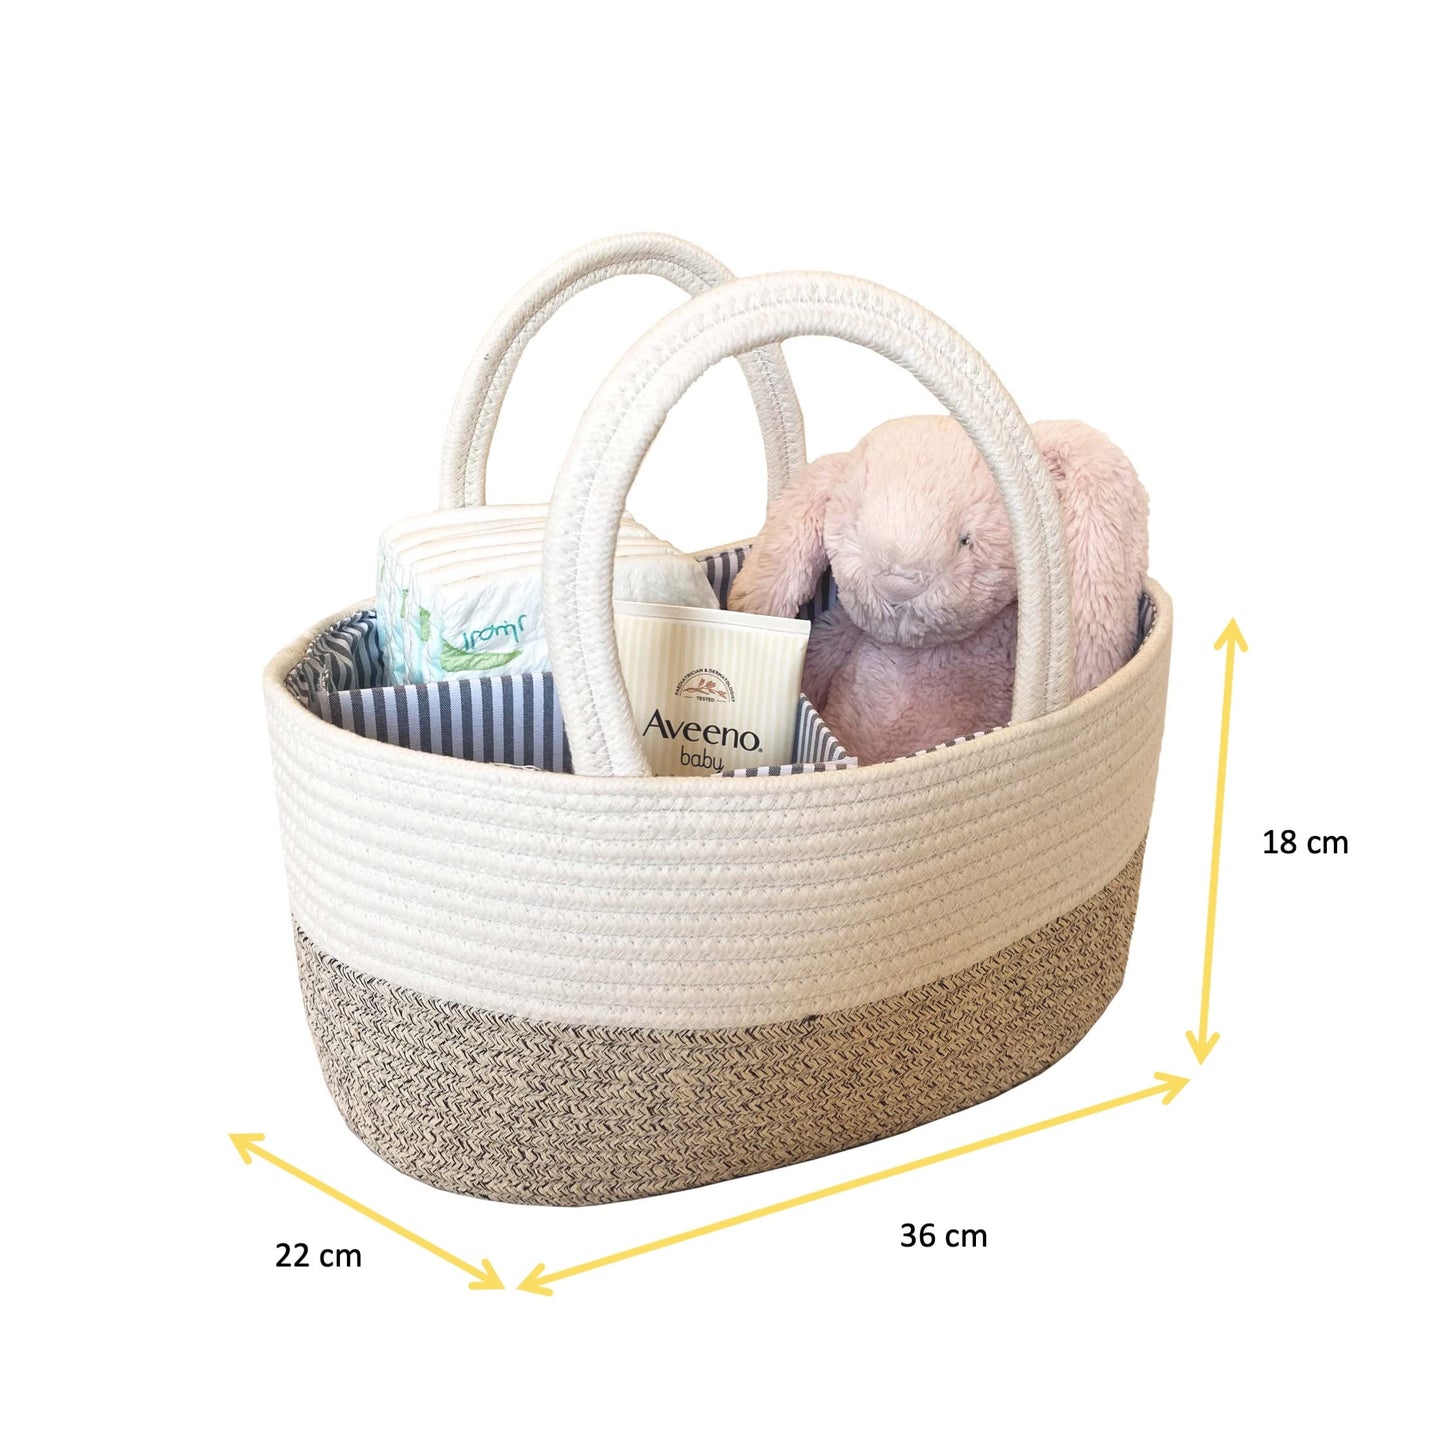 FCG Home - Cotton Rope Diaper Caddy Basket, with Divider & Handles. Baby Changing Table Basket, Nursery Basket, Organizer (White & Natural)